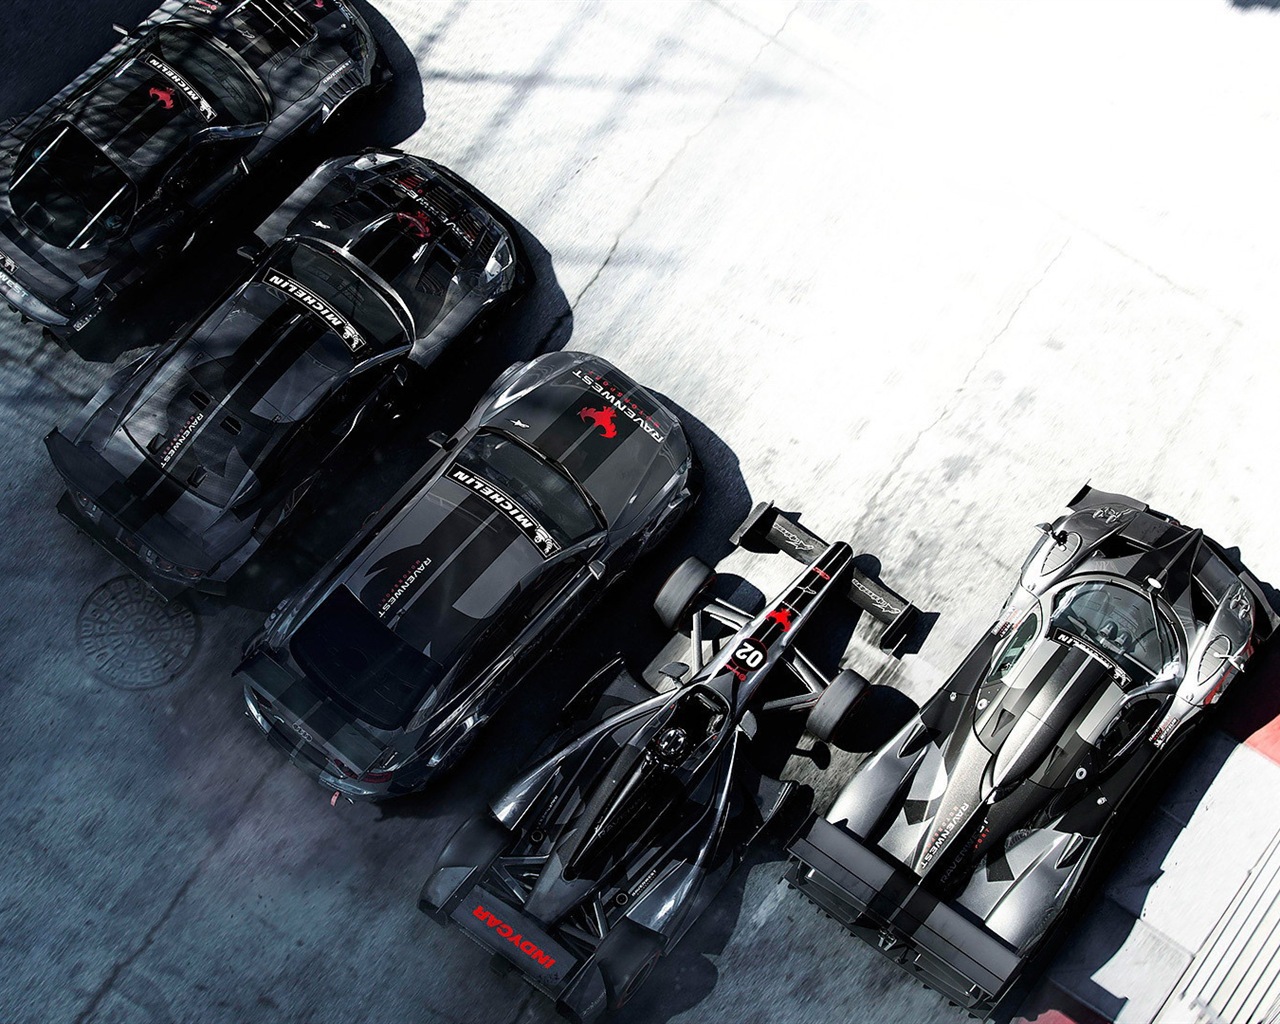 GRID: Autosport HD game wallpapers #5 - 1280x1024